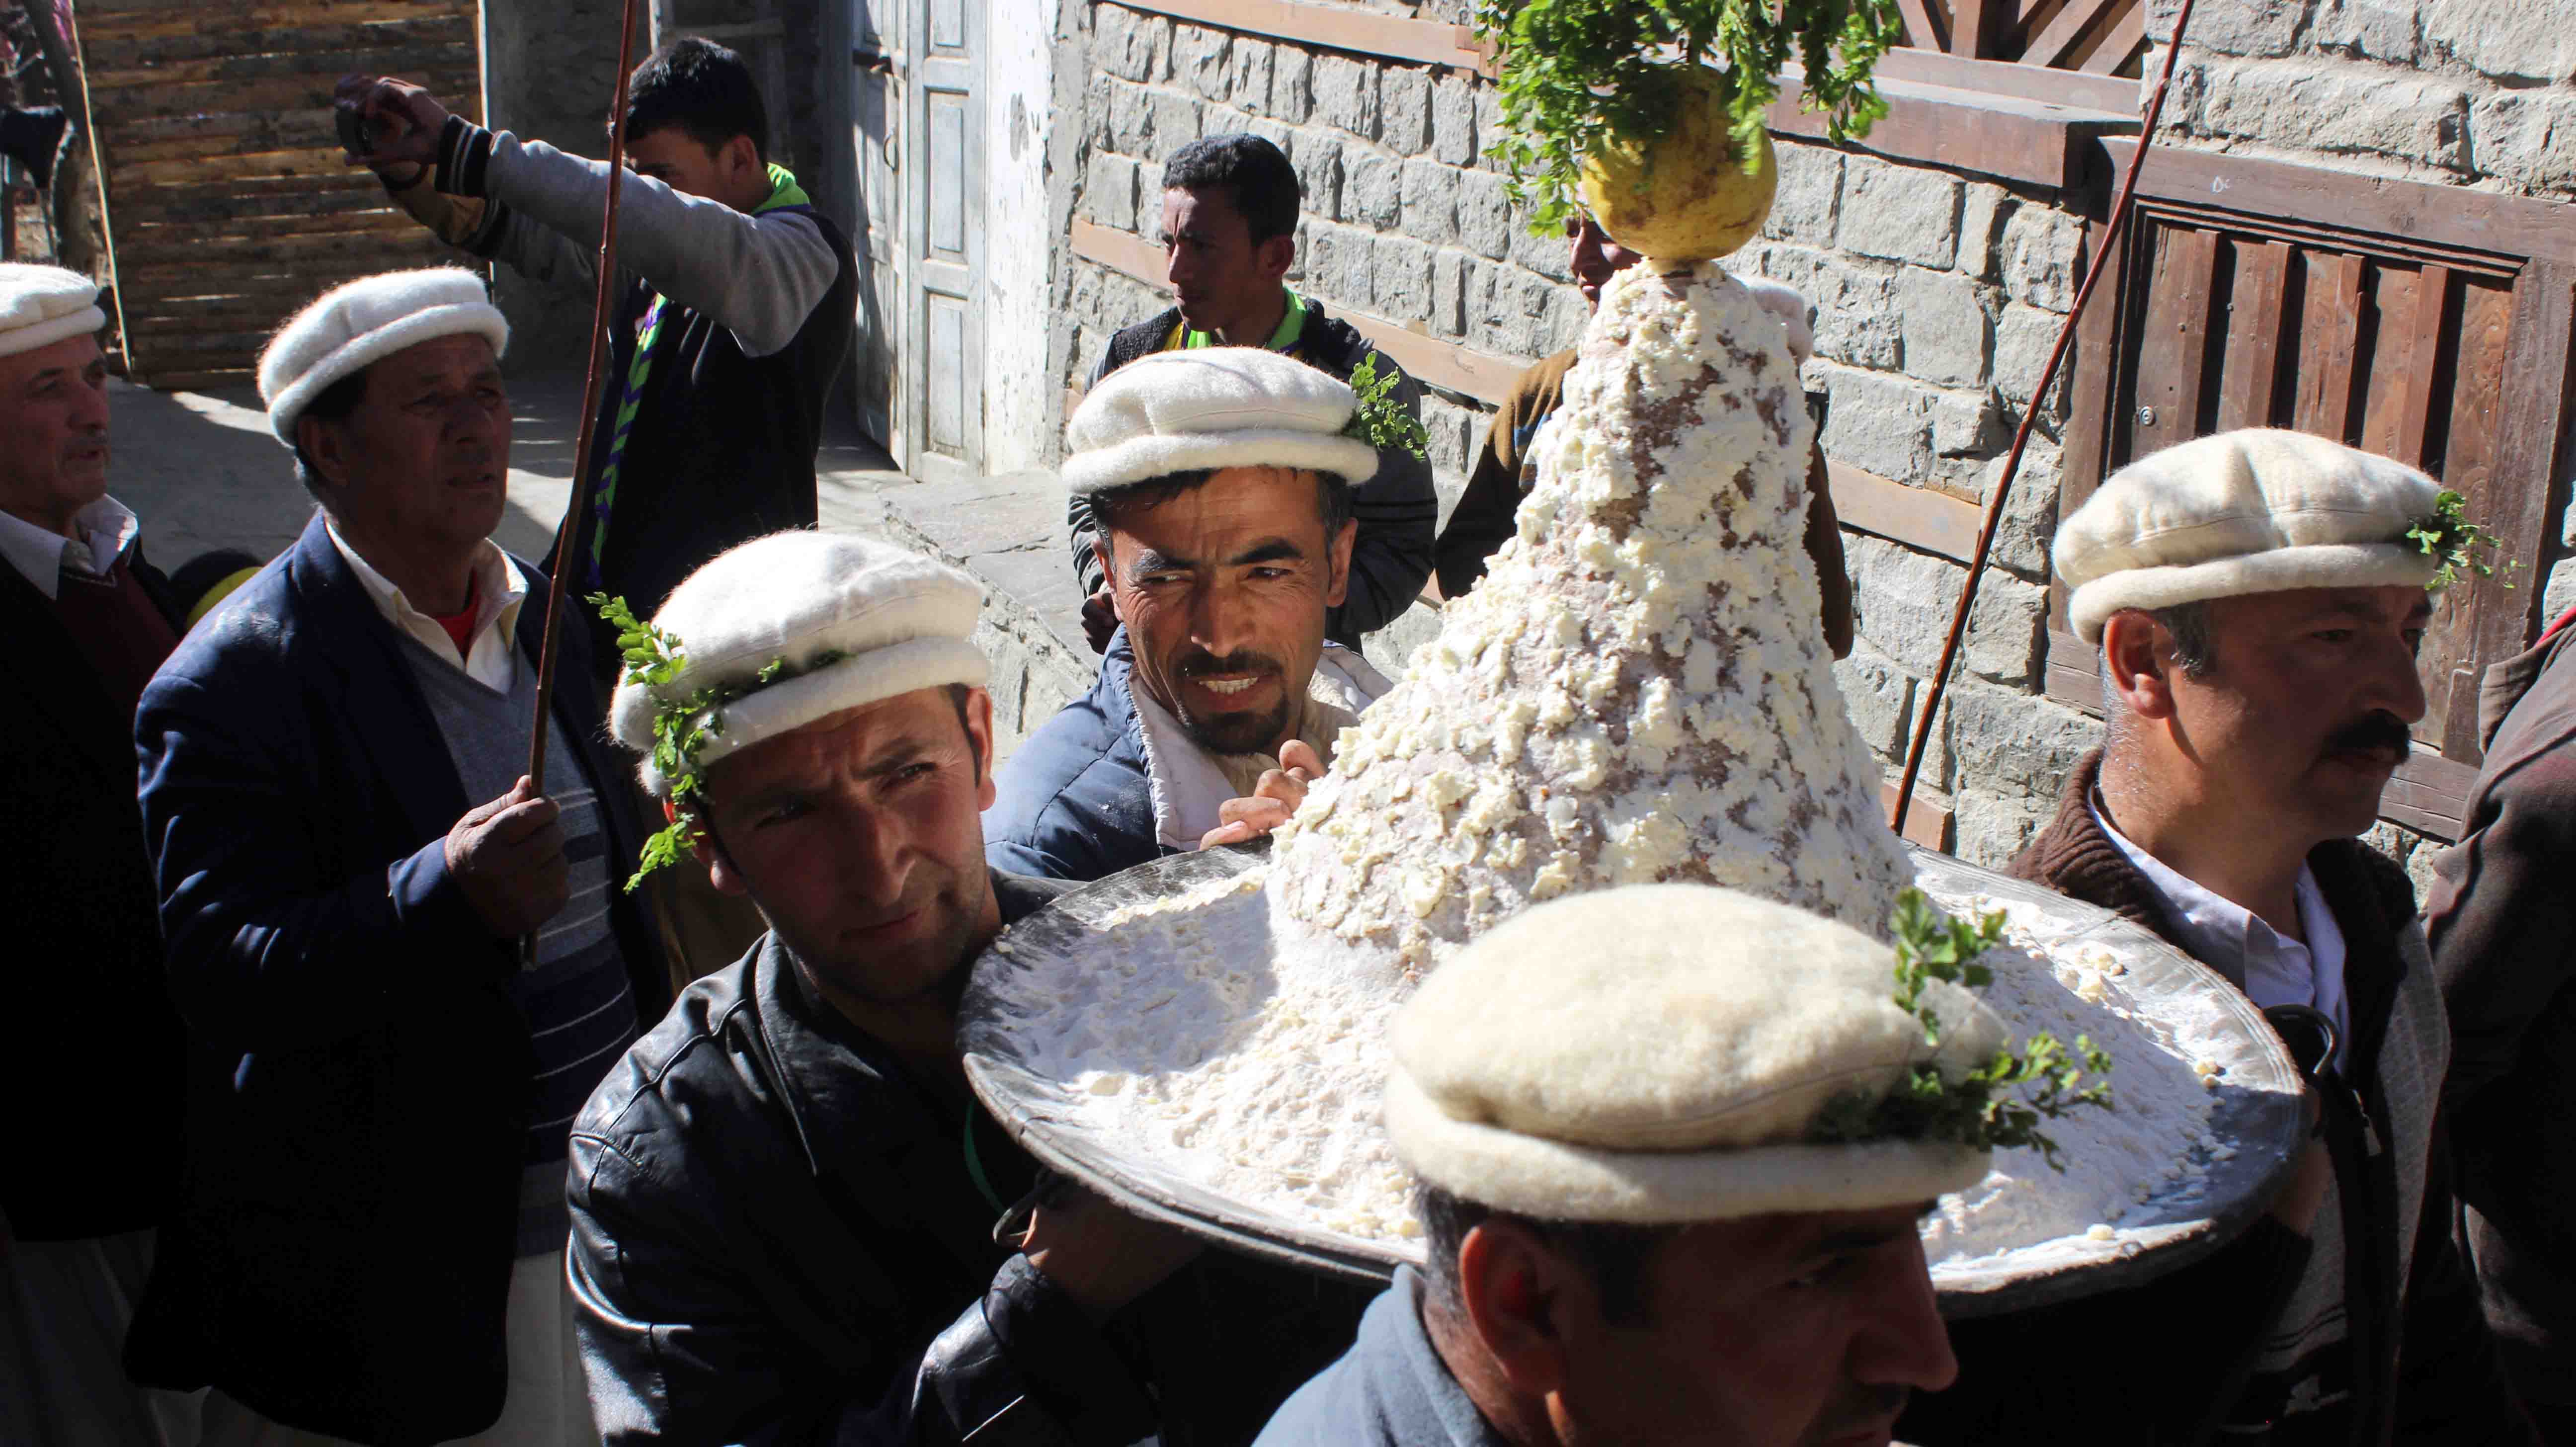 Locals carrying a traditional dish 